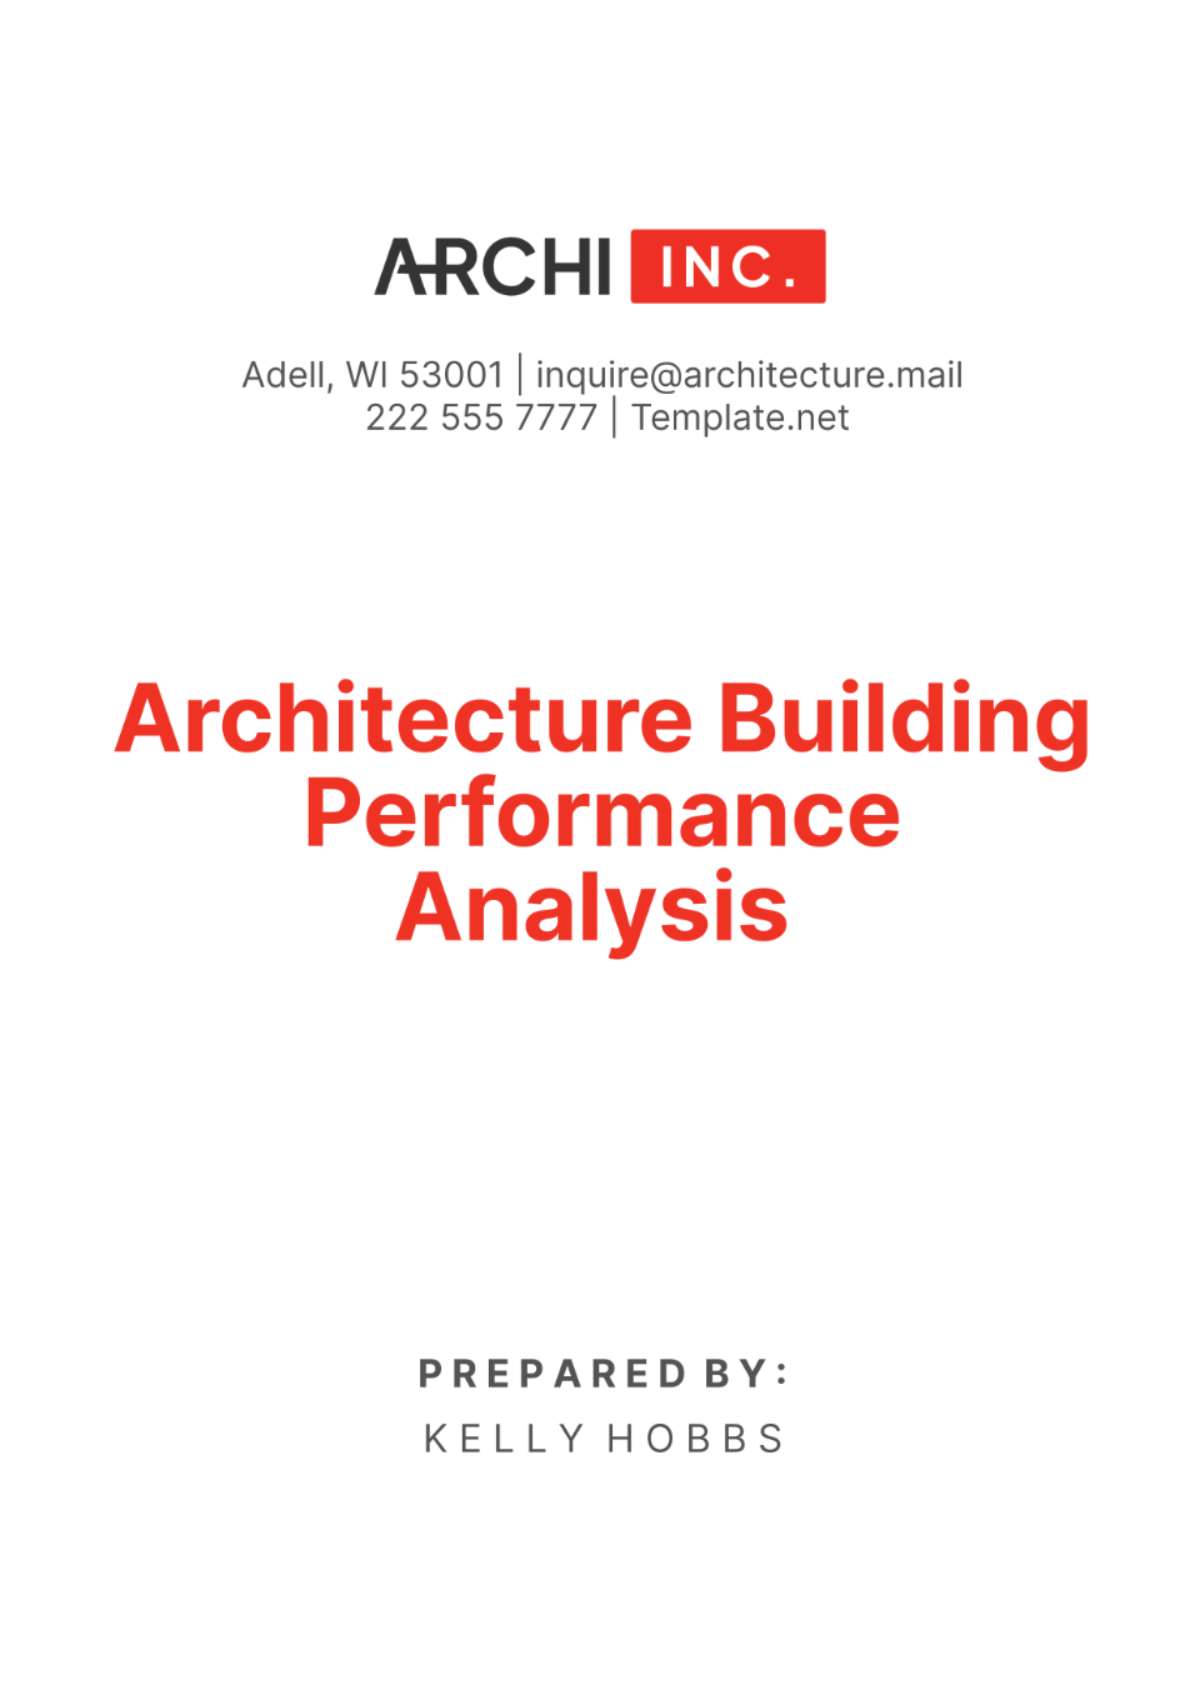 Architecture Building Performance Analysis Template